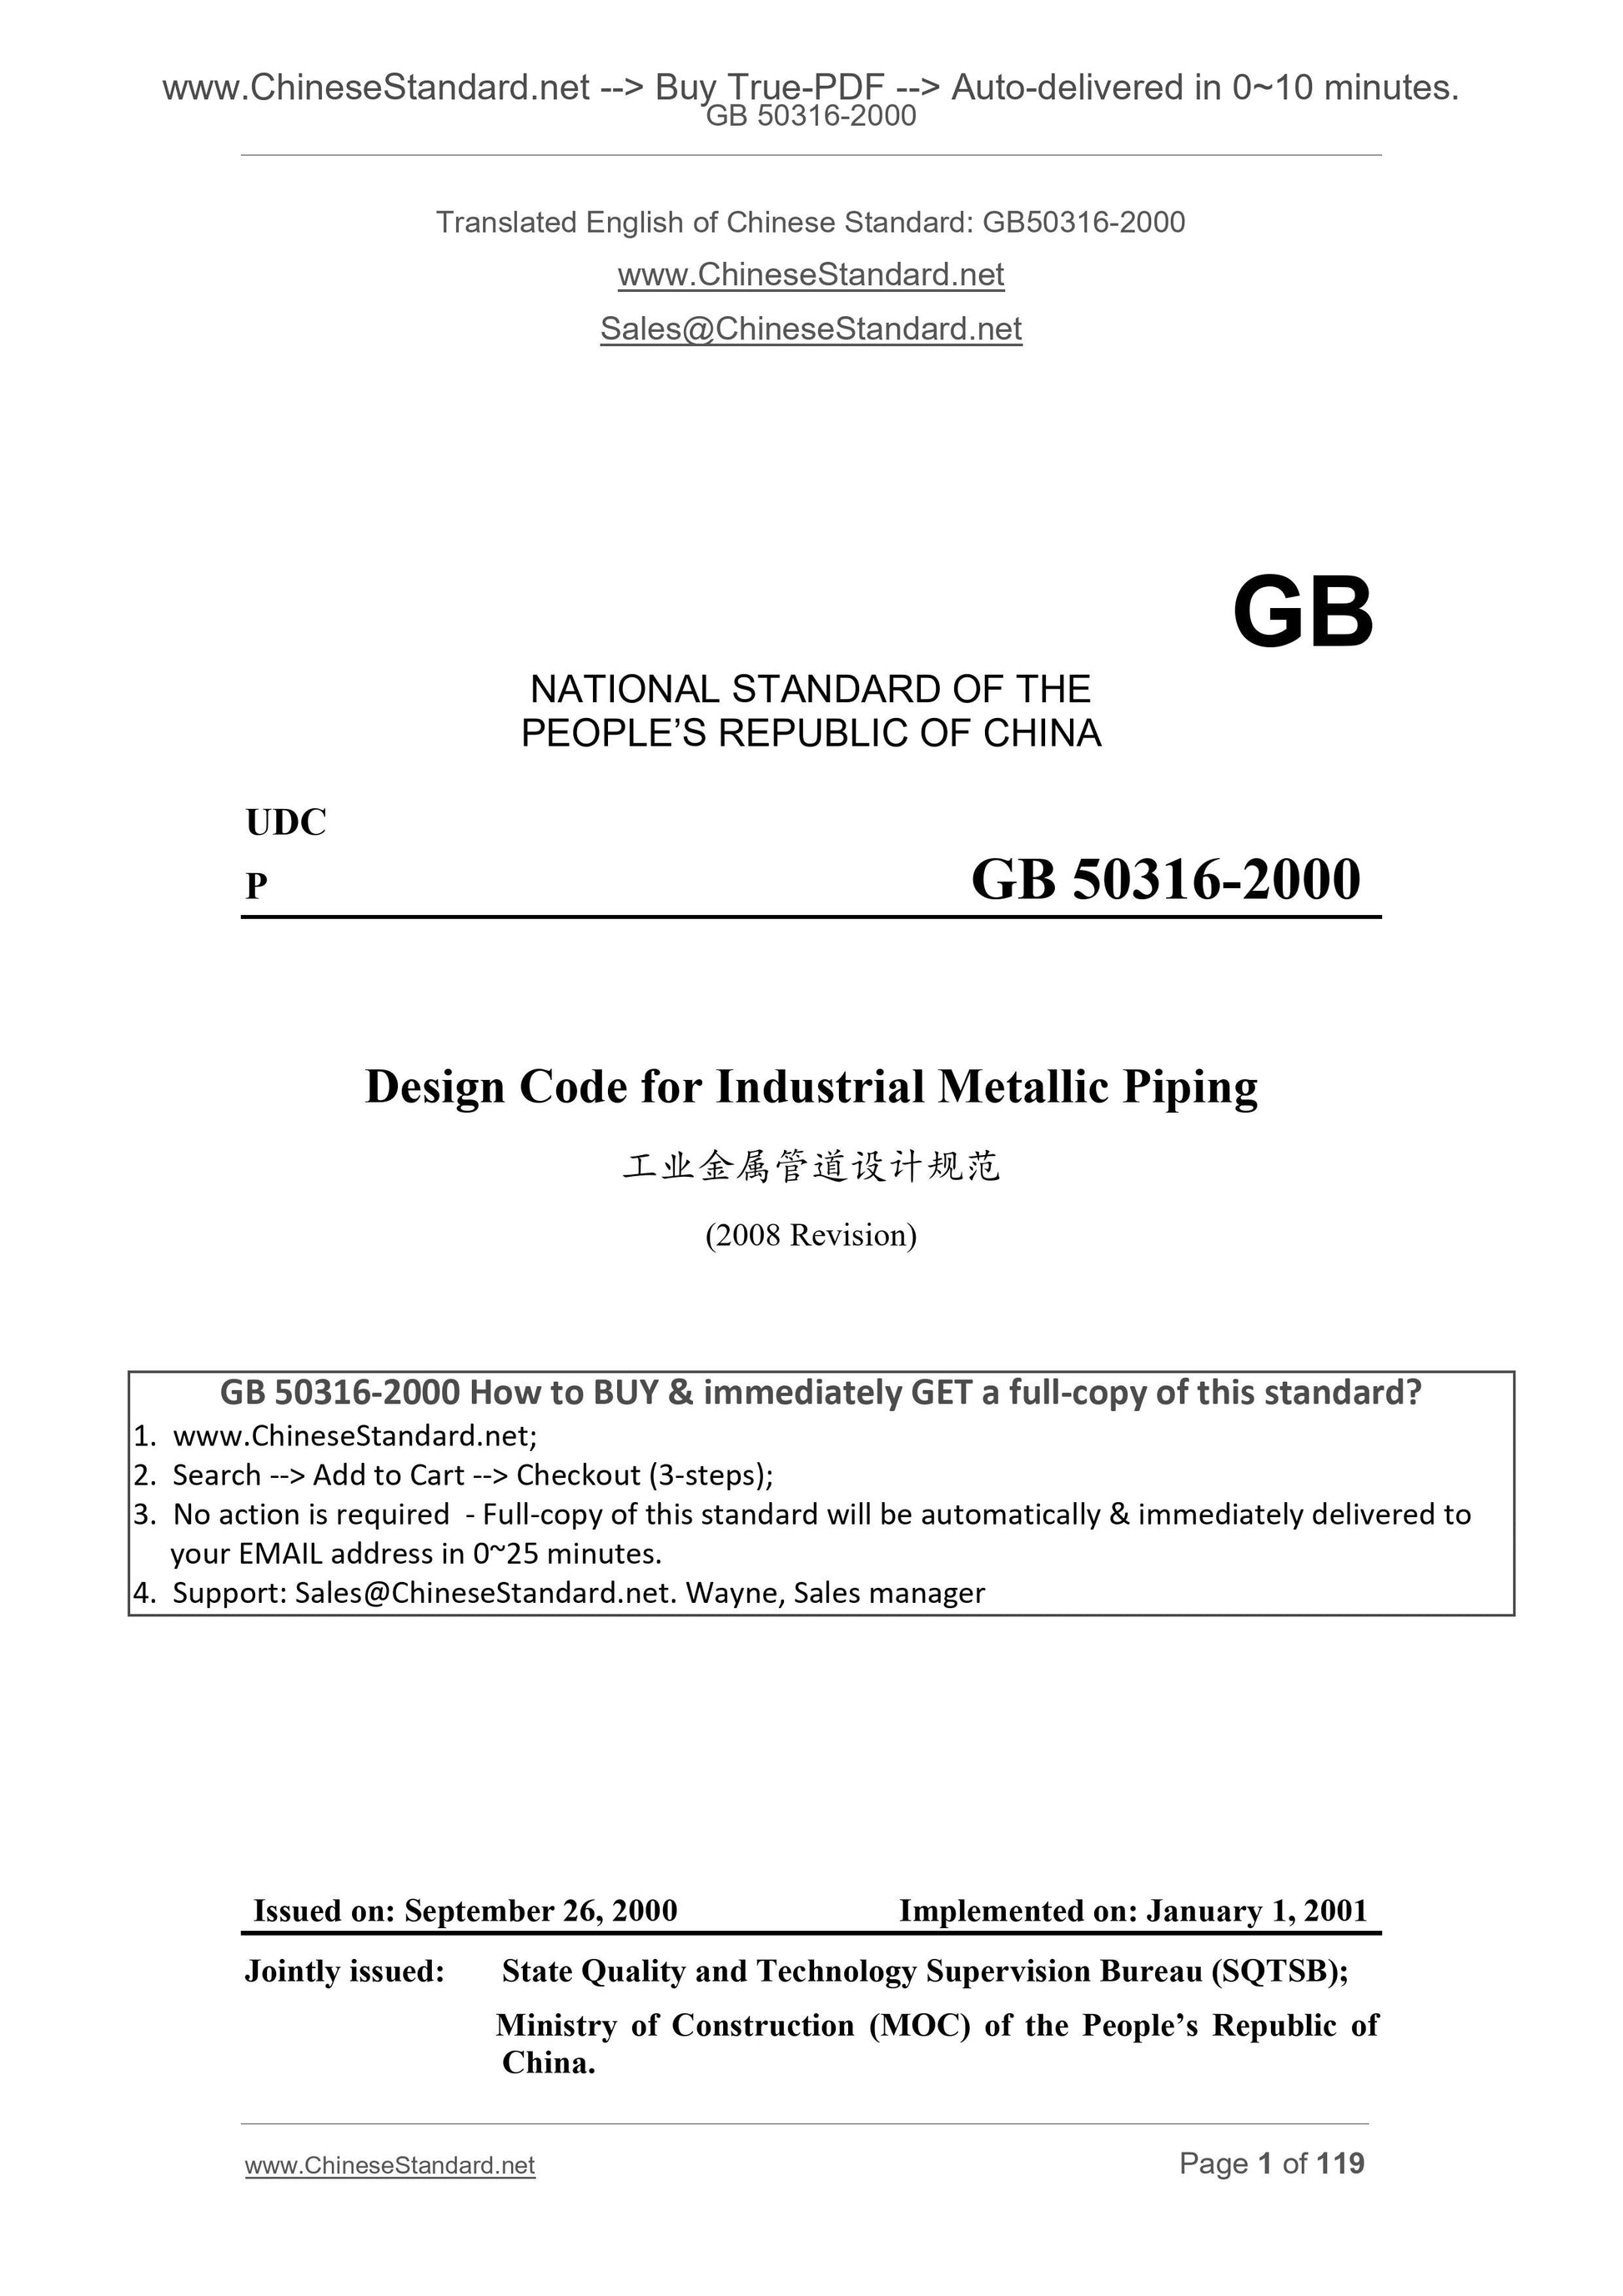 GB 50316-2000 Page 1